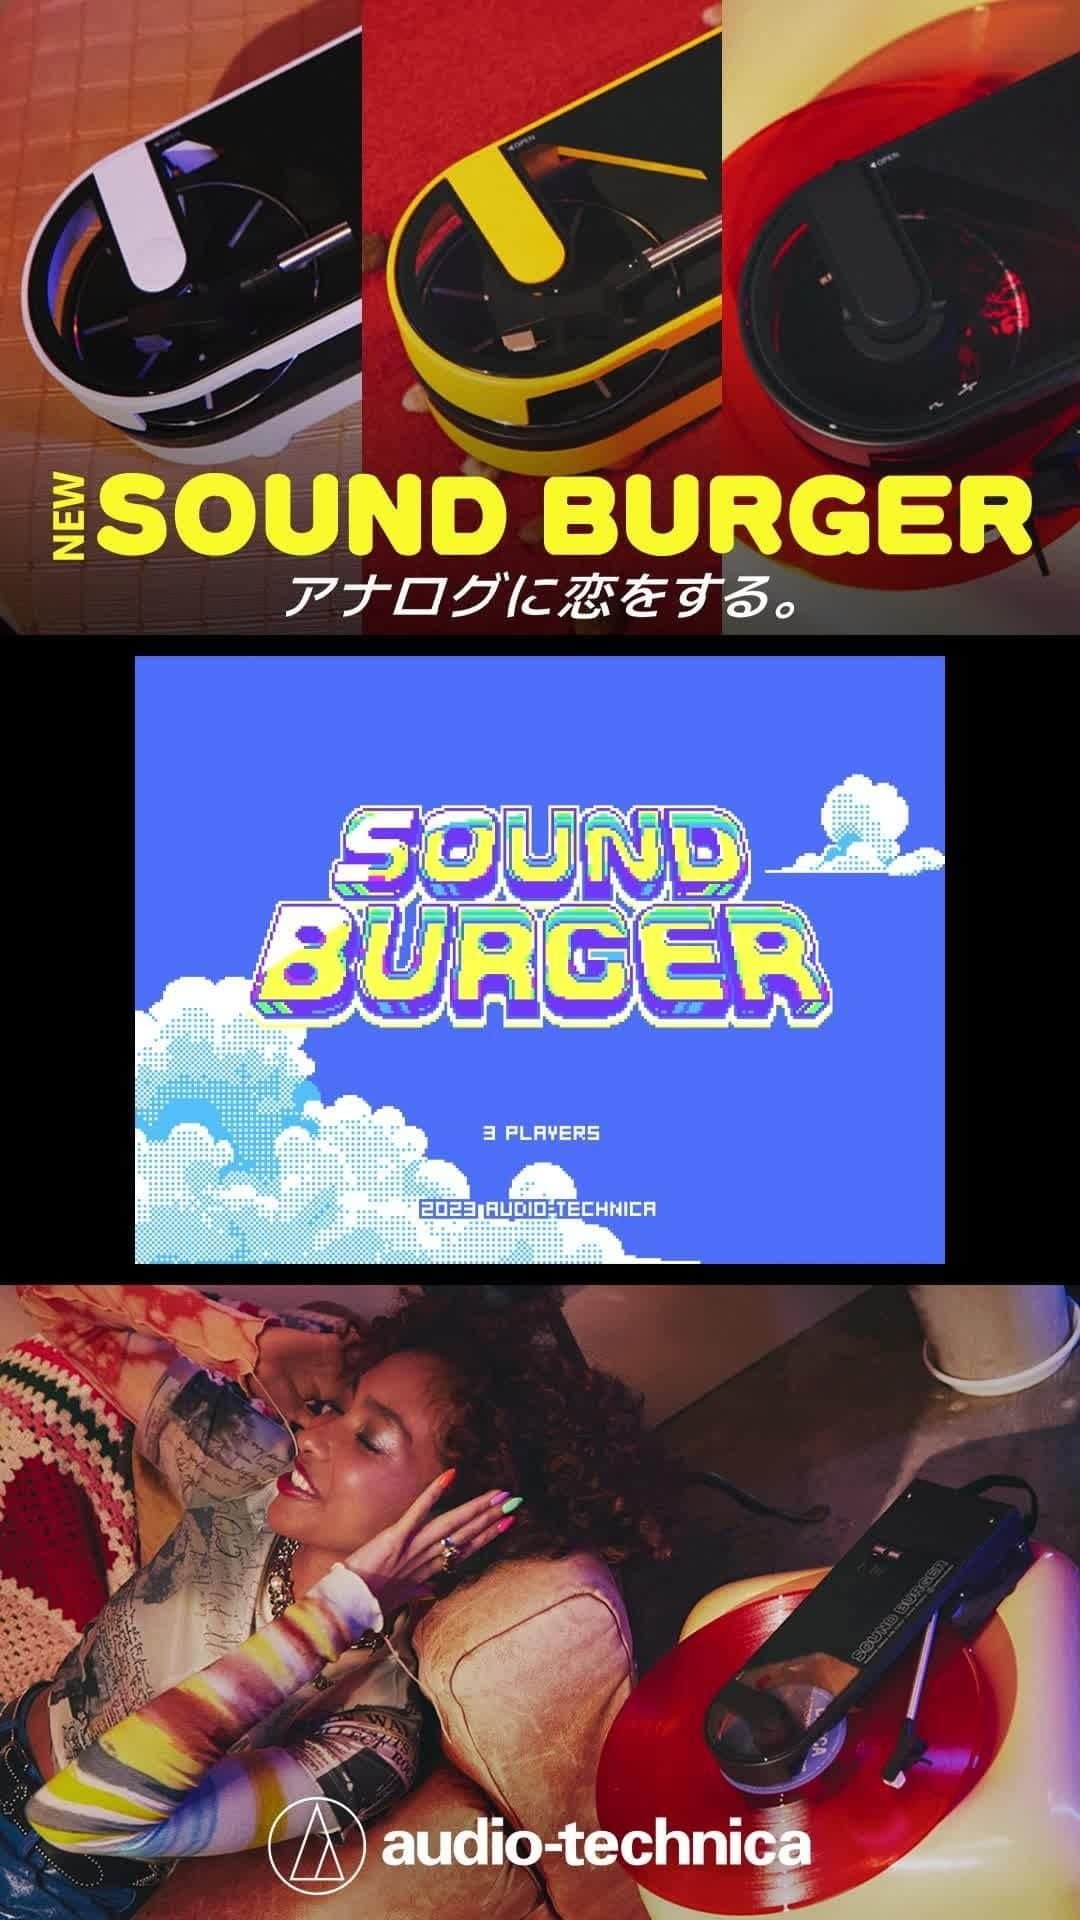 Audio-Technica USAのインスタグラム：「The wait is over - Sound Burger is back! 🍔🎶⁠ ⁠ Three new colors are available on our website right now. 👀⁠ ⁠ If the appetite for Sound Burgers is as big as before, don’t worry - more stock will be on the way! Link in bio!⁠ ⁠ #SaveTheVinyls #LoveAtFirstListen #SoundBurger #AudioTechnica⁠」